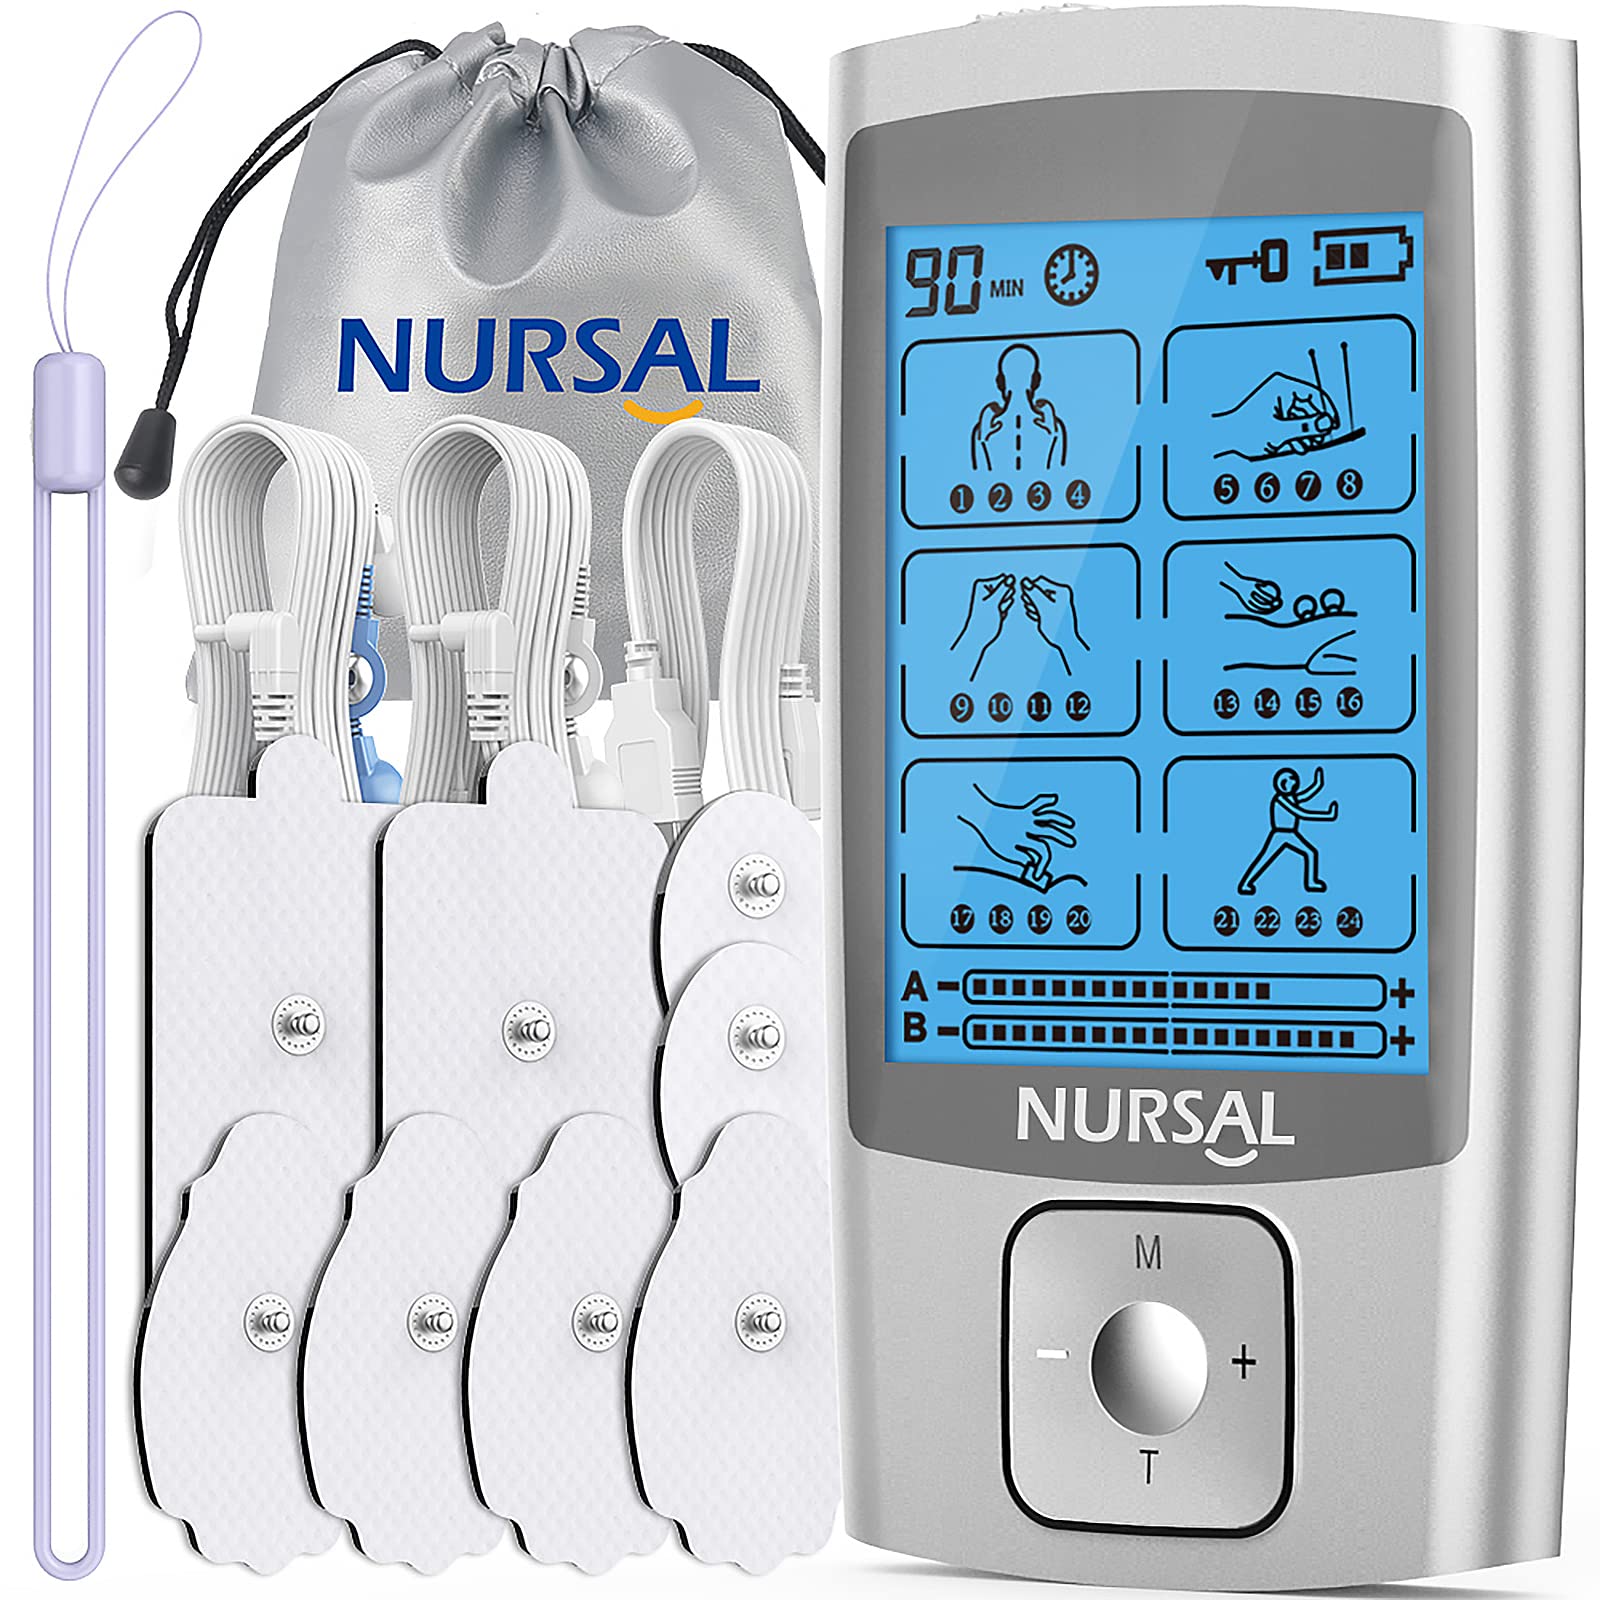 NURSAL TENS Unit Muscle Stimulator Machine for Pain Relief Therapy, Electric  Stim Massager for Back, Neck, Muscle Pain Relief Product ( FSA or HSA  Eligible)